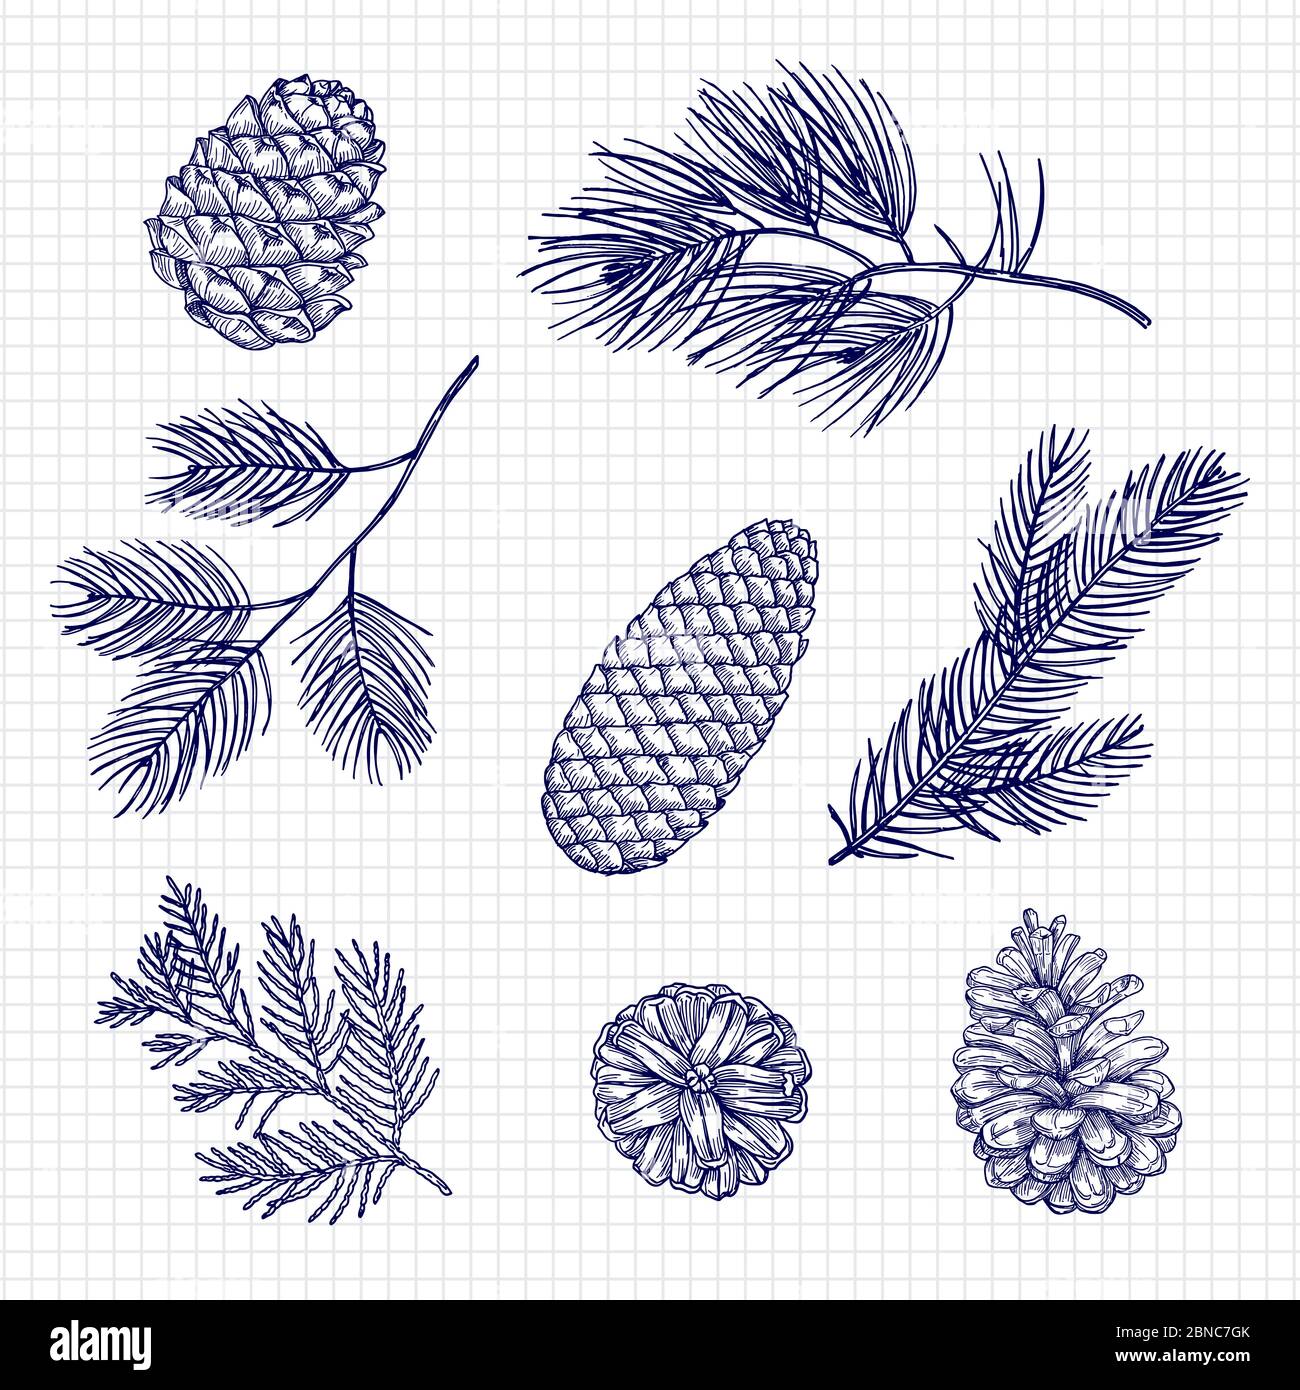 Hand sketched fir tree branches and cones vector illustration isolated on white Stock Vector